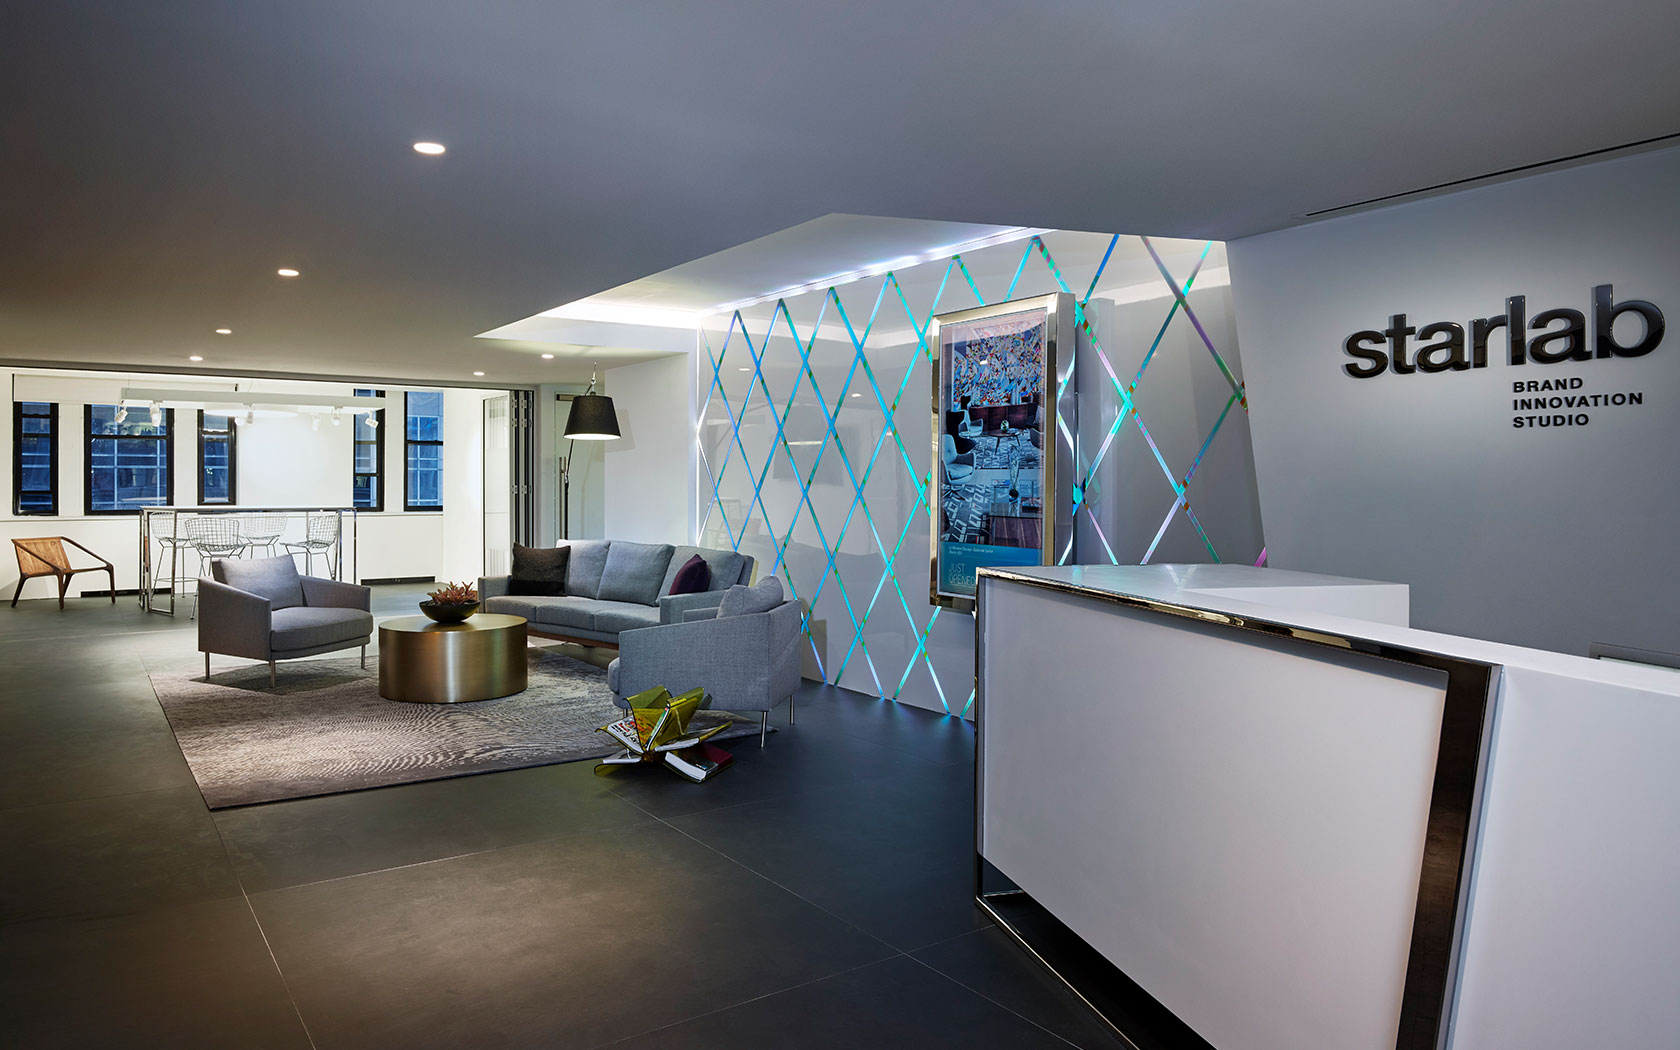 The lobby of Starwood Design Studio features upholstered seating and a brightly lite diamond-patterned wall